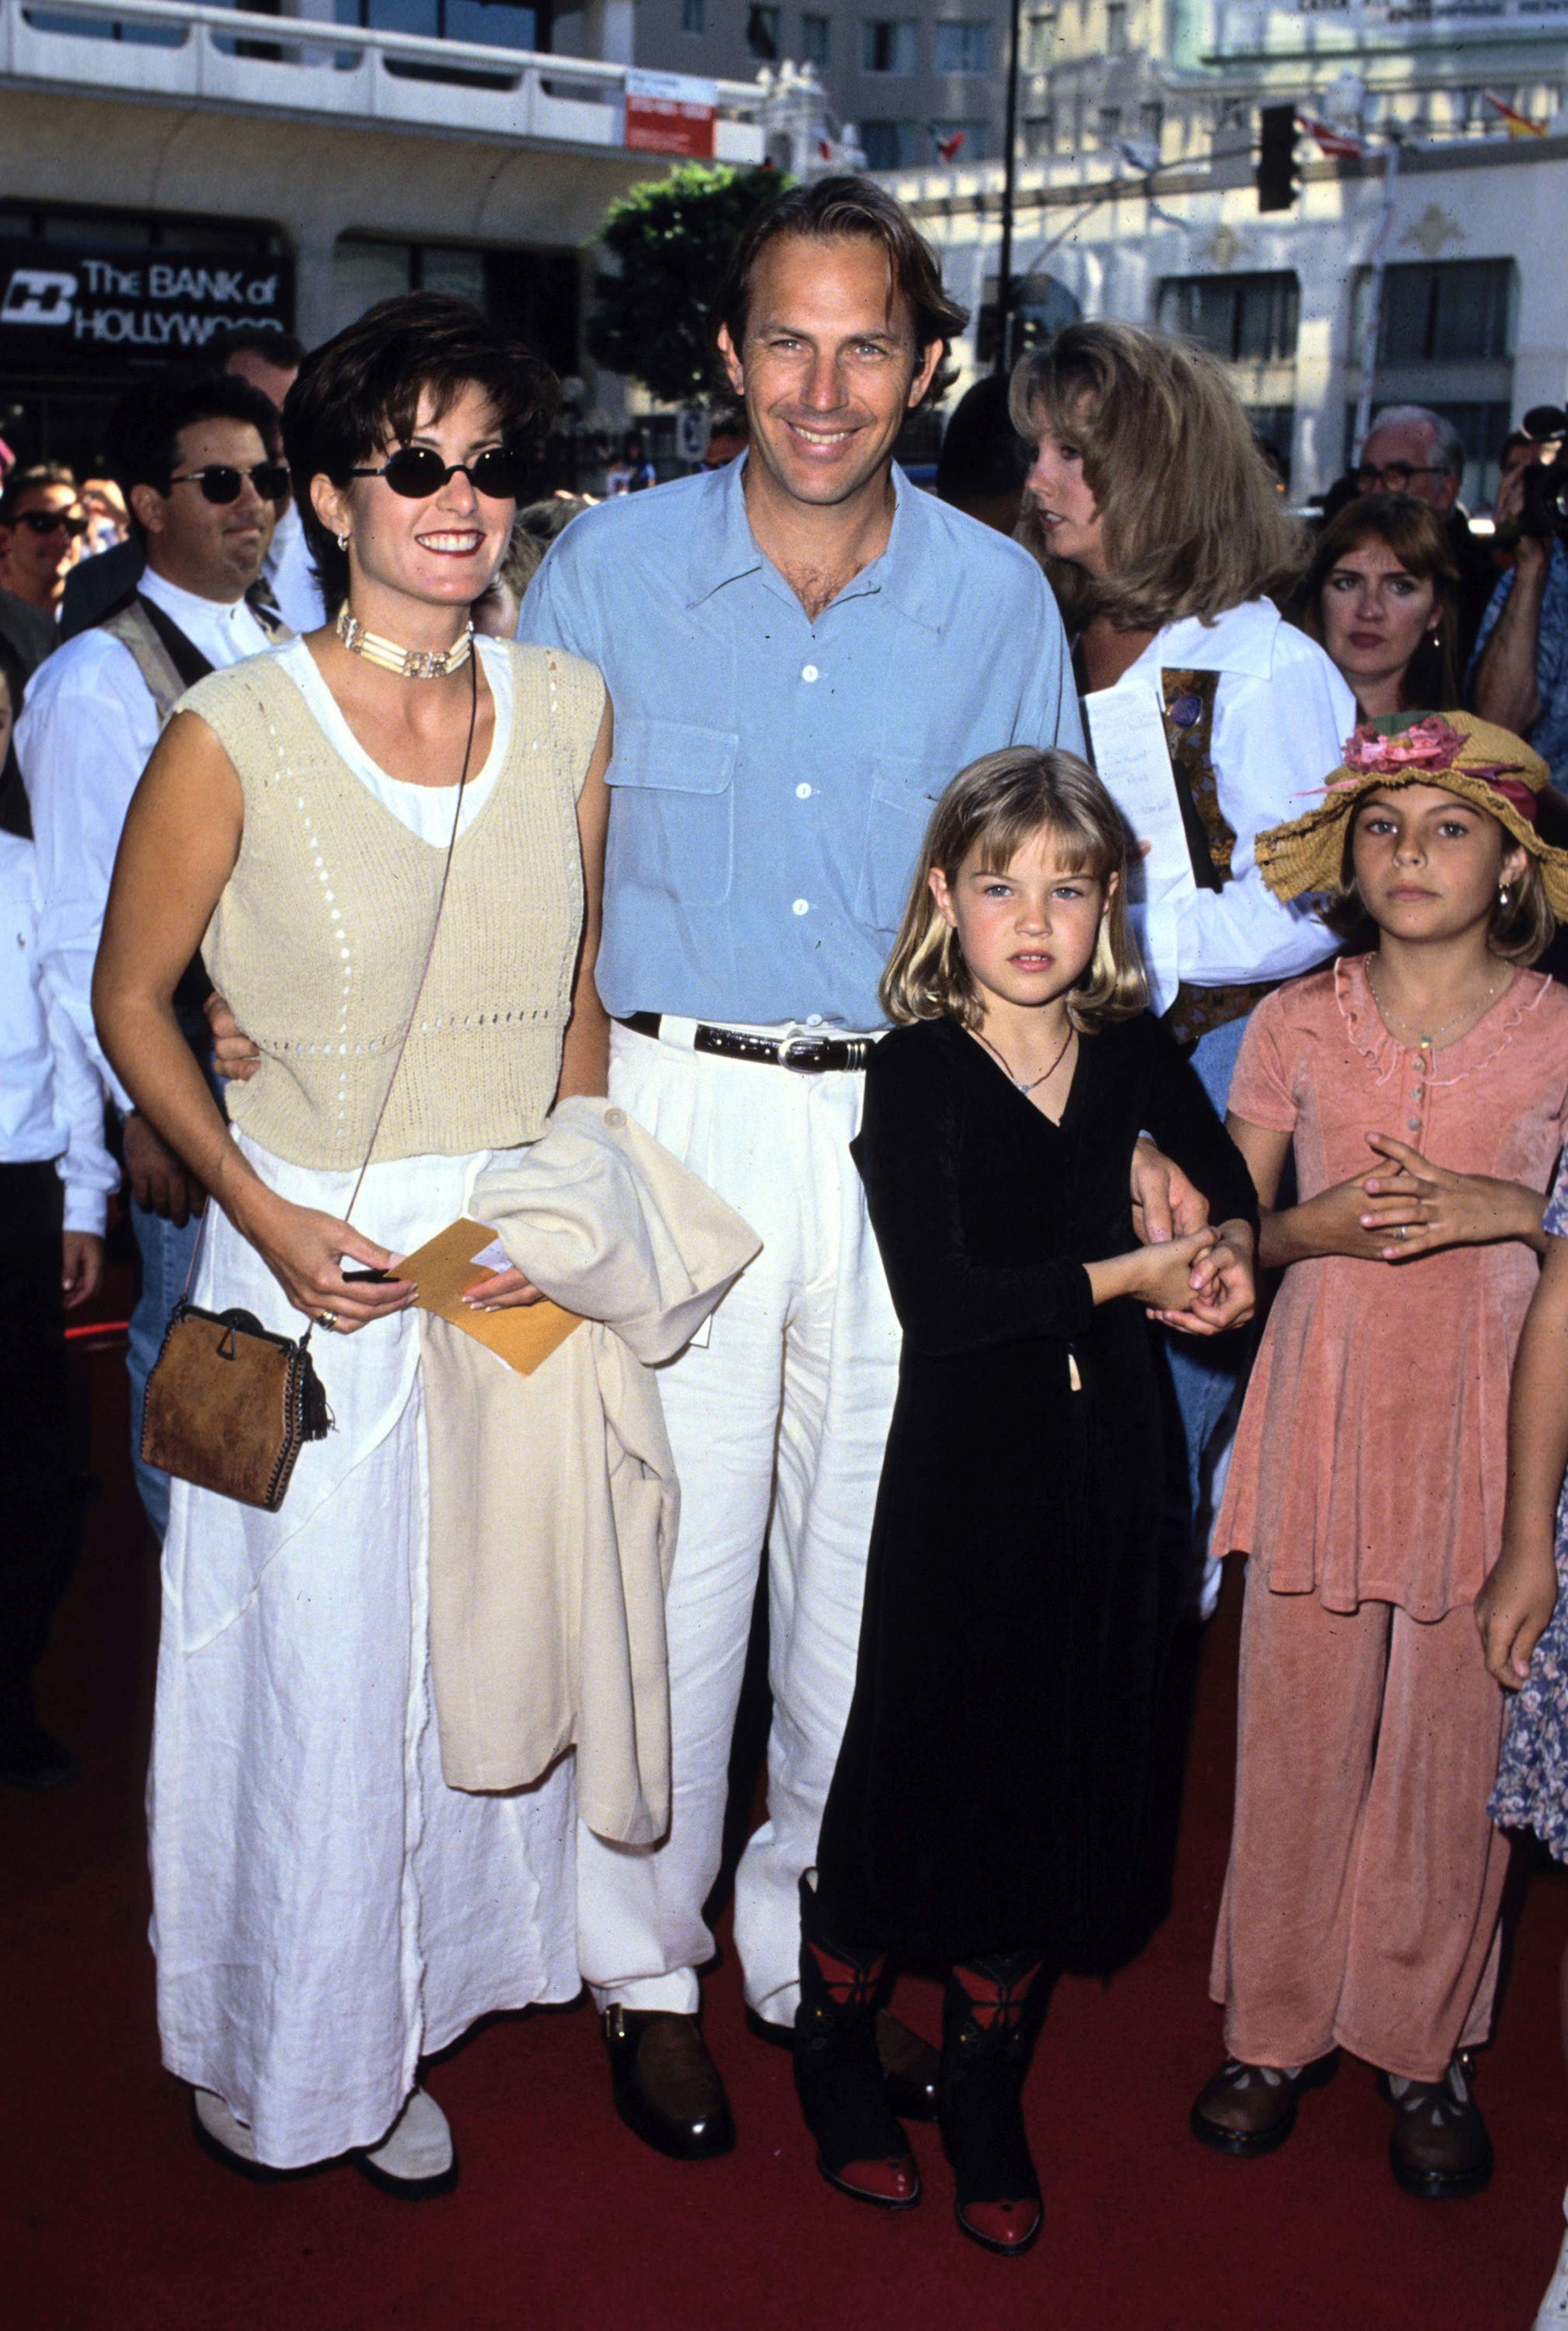 Producer Kevin Costner with wife designer Cindy Costner and their kids Anne, Lily and Joe | Source: Getty Images